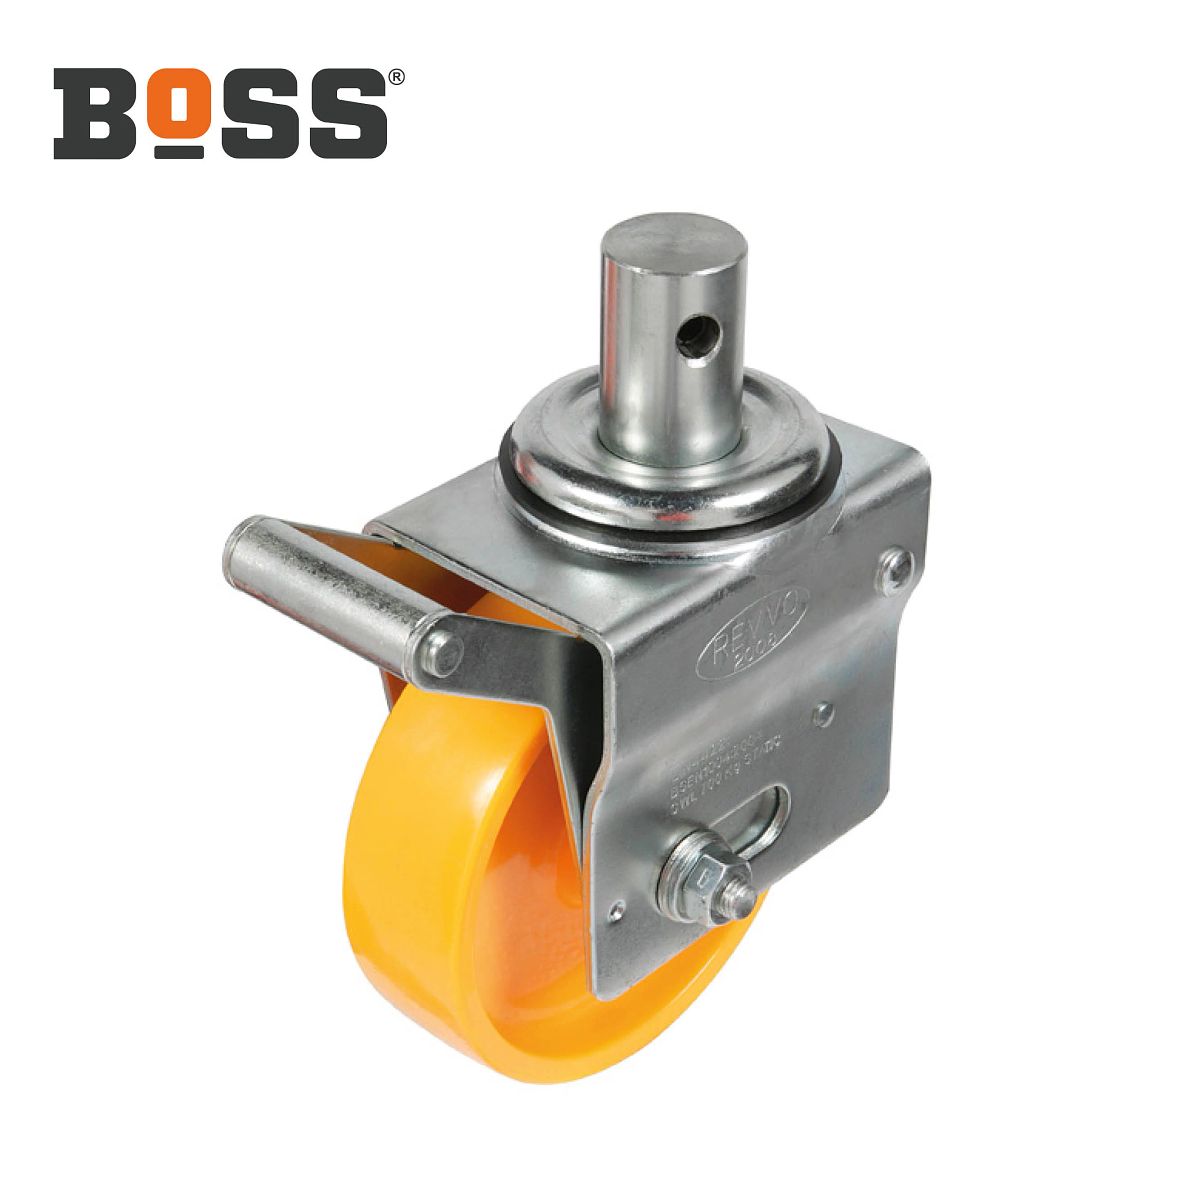 Towers 32842300 Components | Access BoSS BoSS |